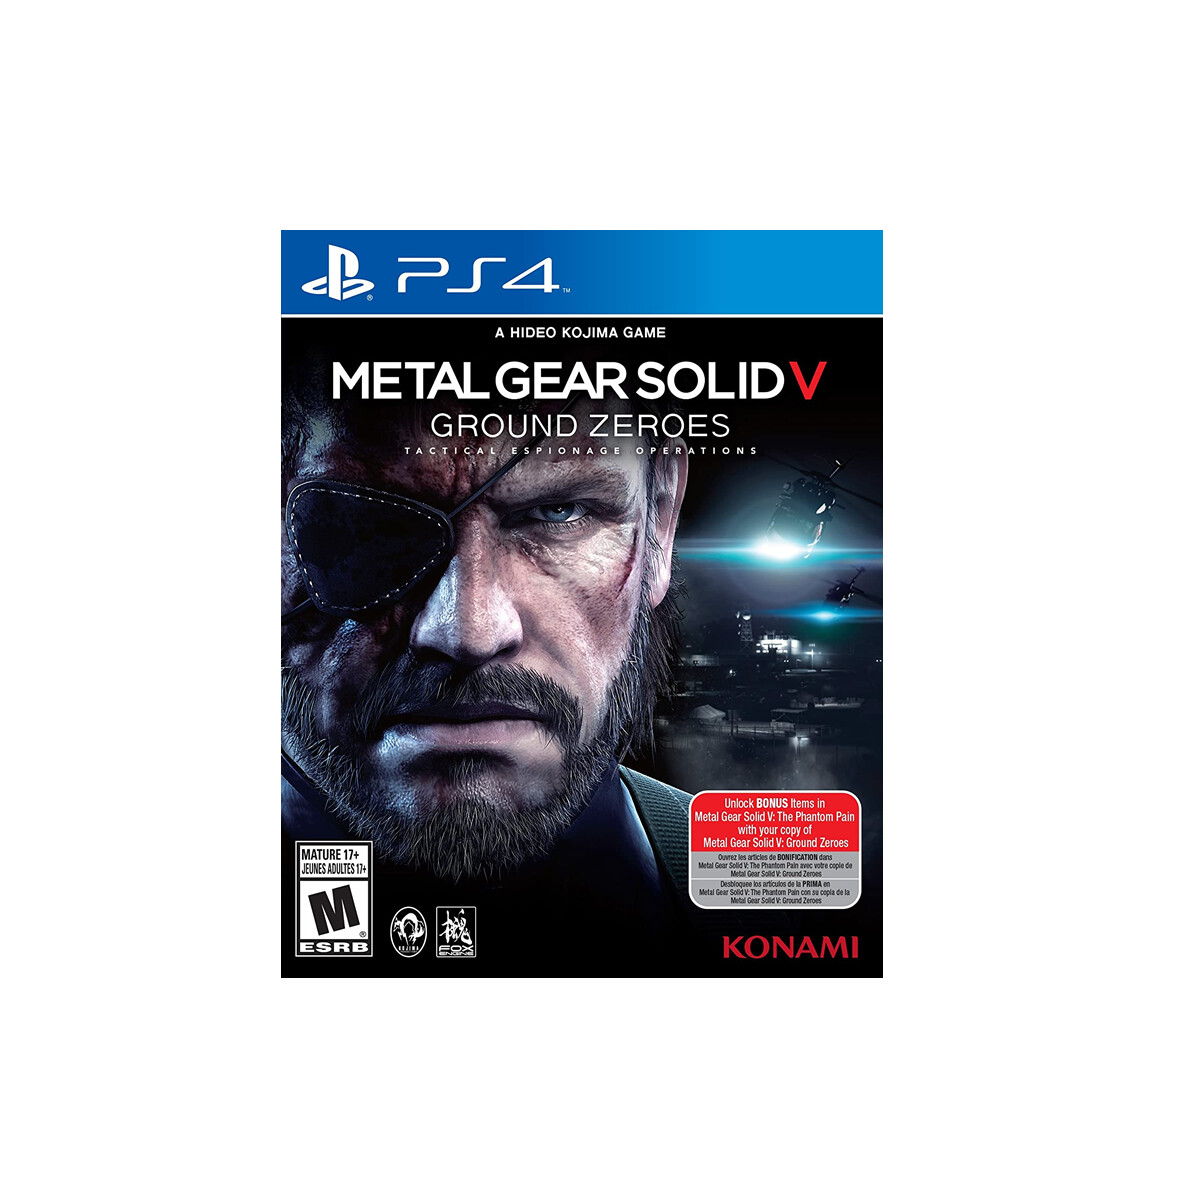 PS4 METAL GEAR SOLID V: GROUND ZEROES 